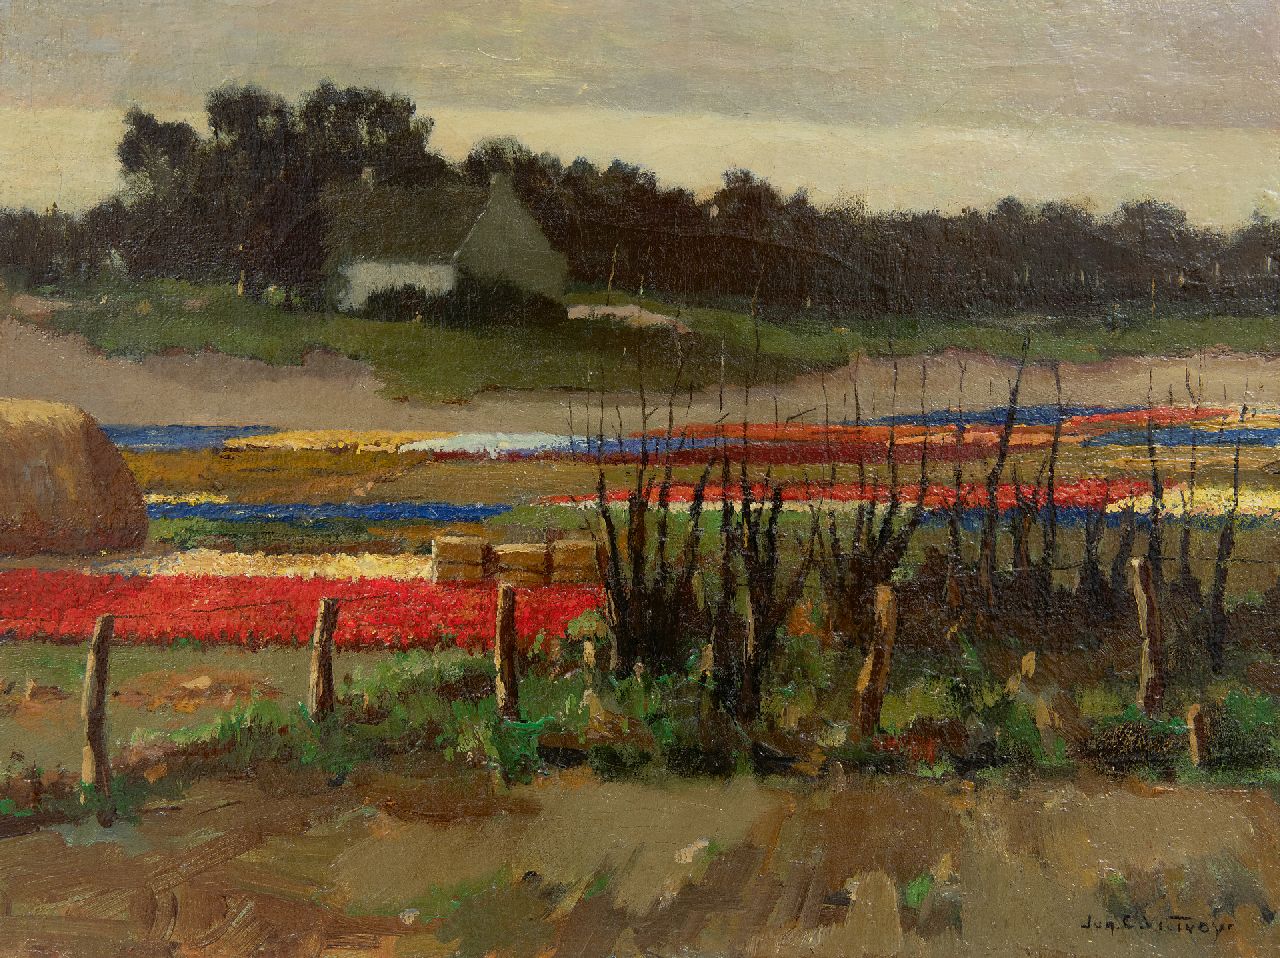 Europese School, begin 20e eeuw   | Europese School, begin 20e eeuw | Paintings offered for sale | Bulb fields, oil on canvas 30.5 x 40.4 cm, signed l.r.